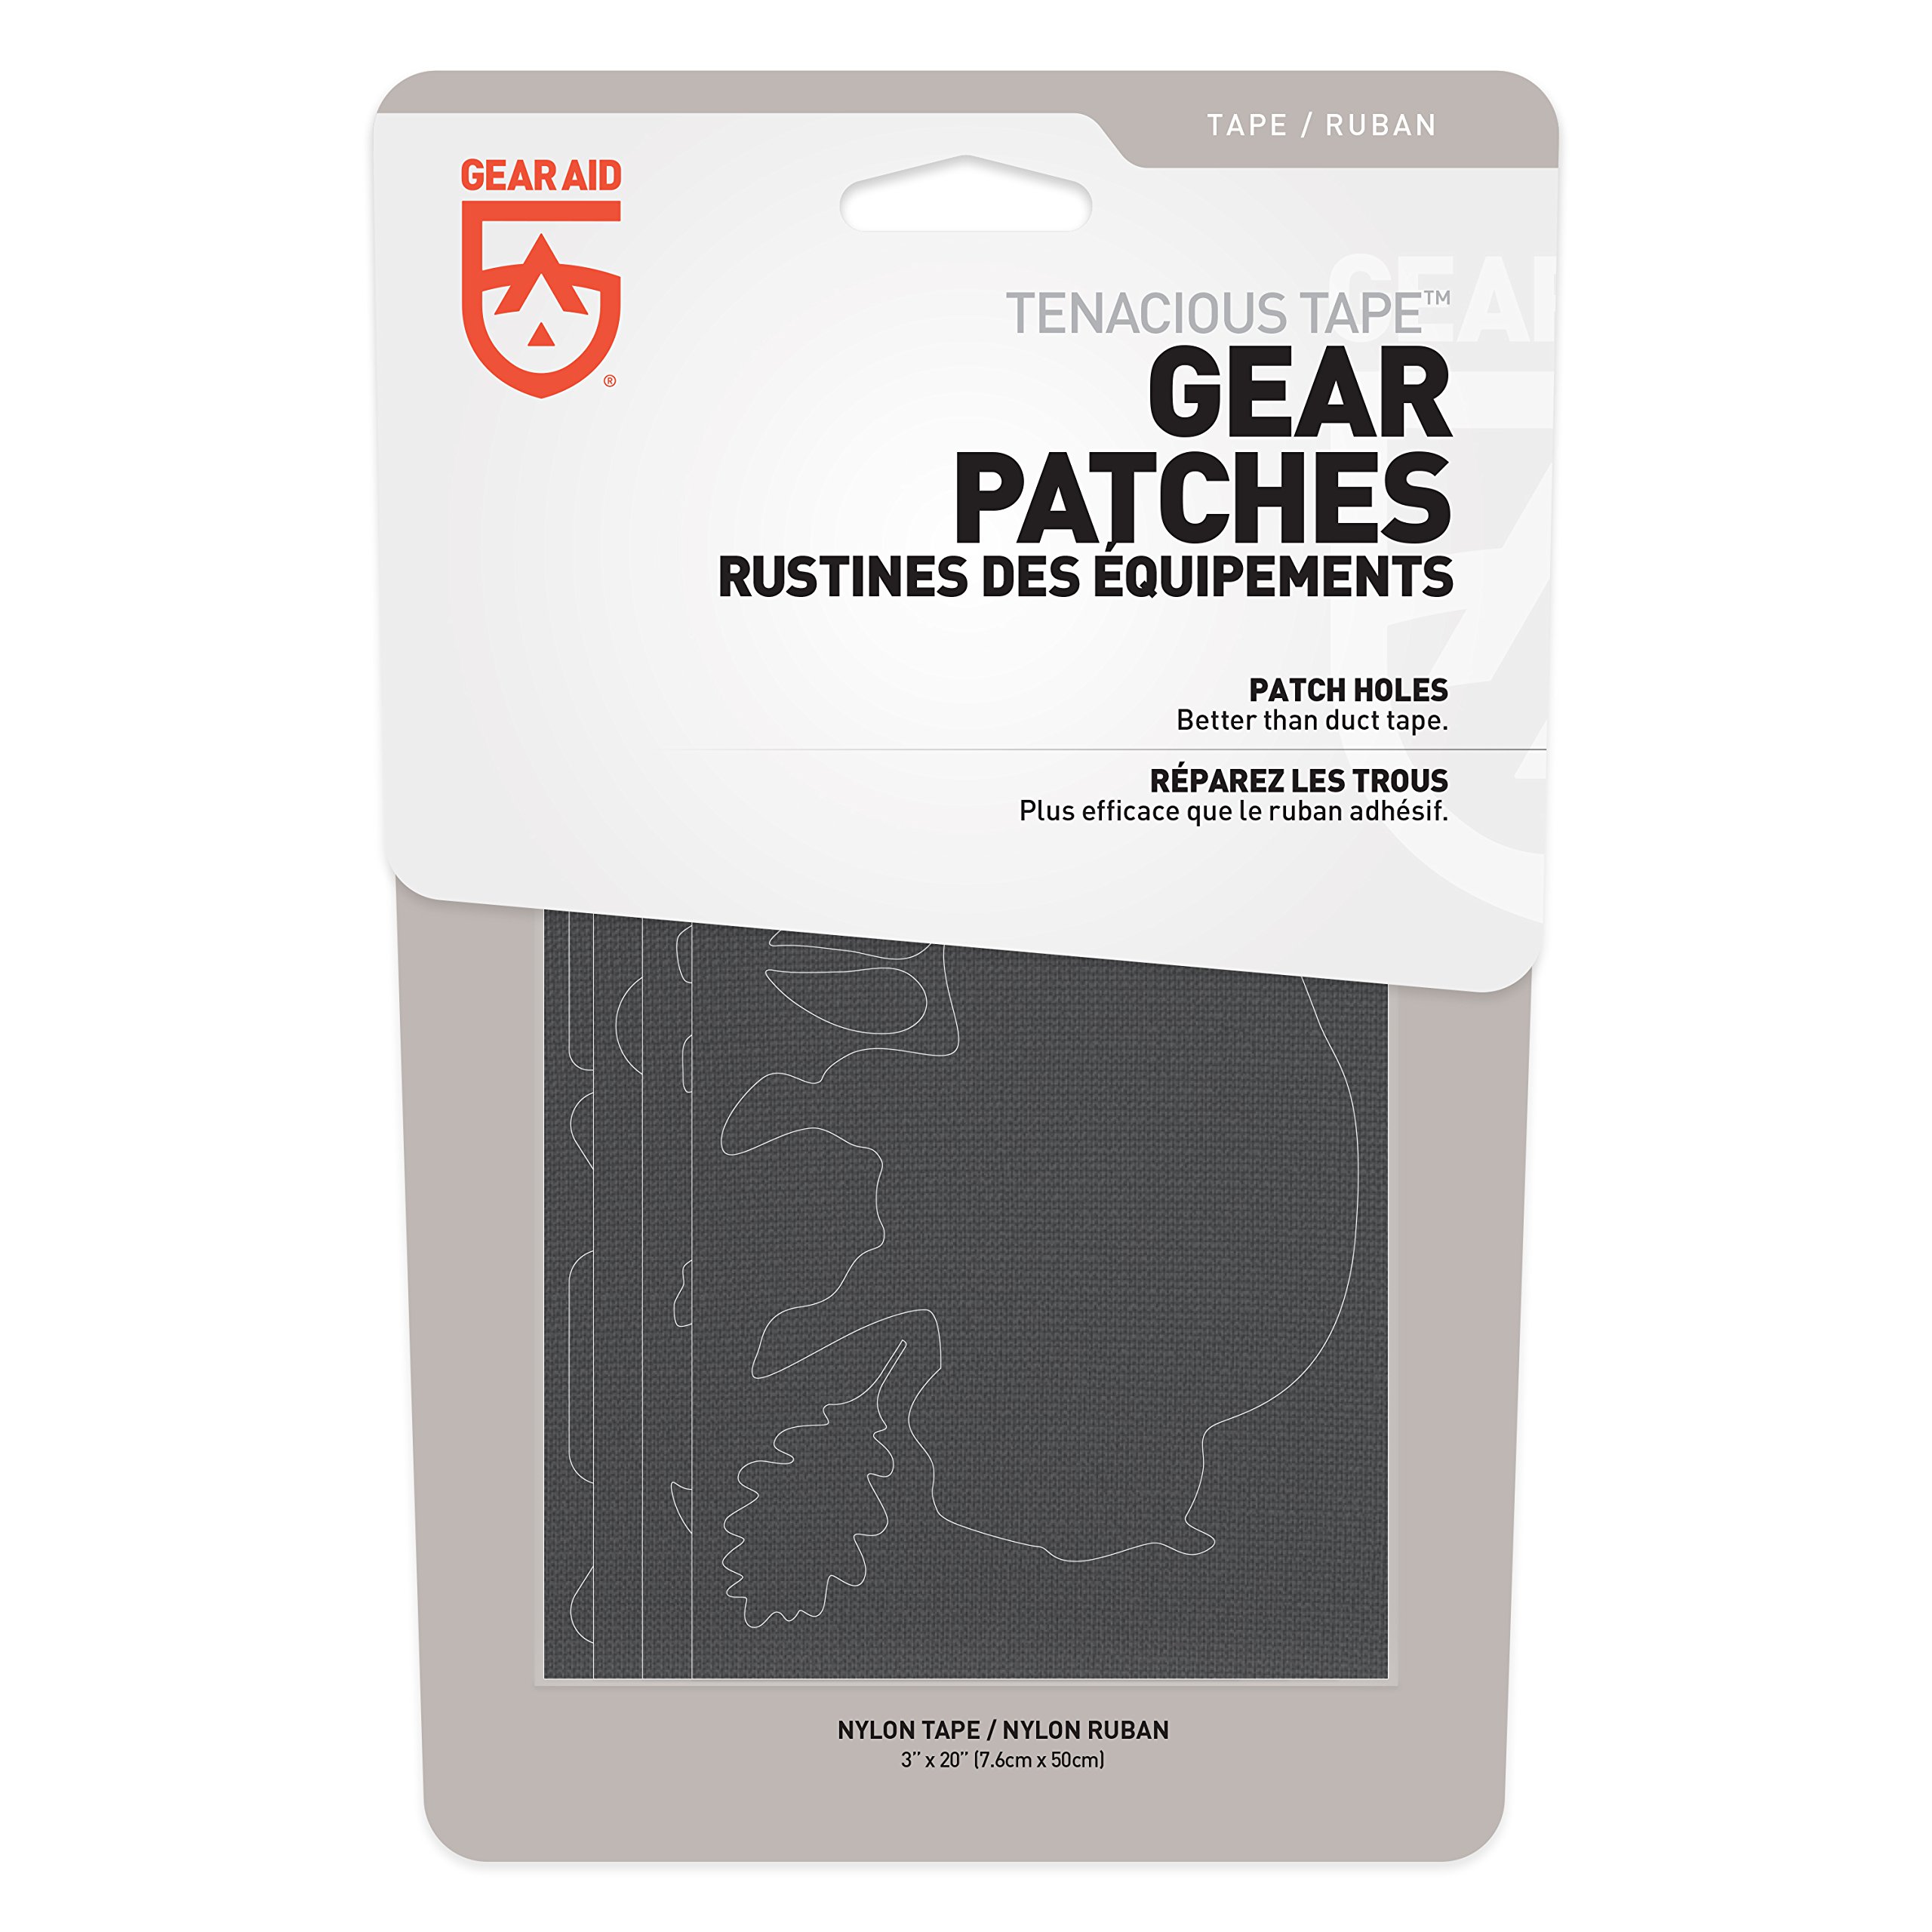 GEAR AID Tenacious Tape Gear Patches for Jacket Repair